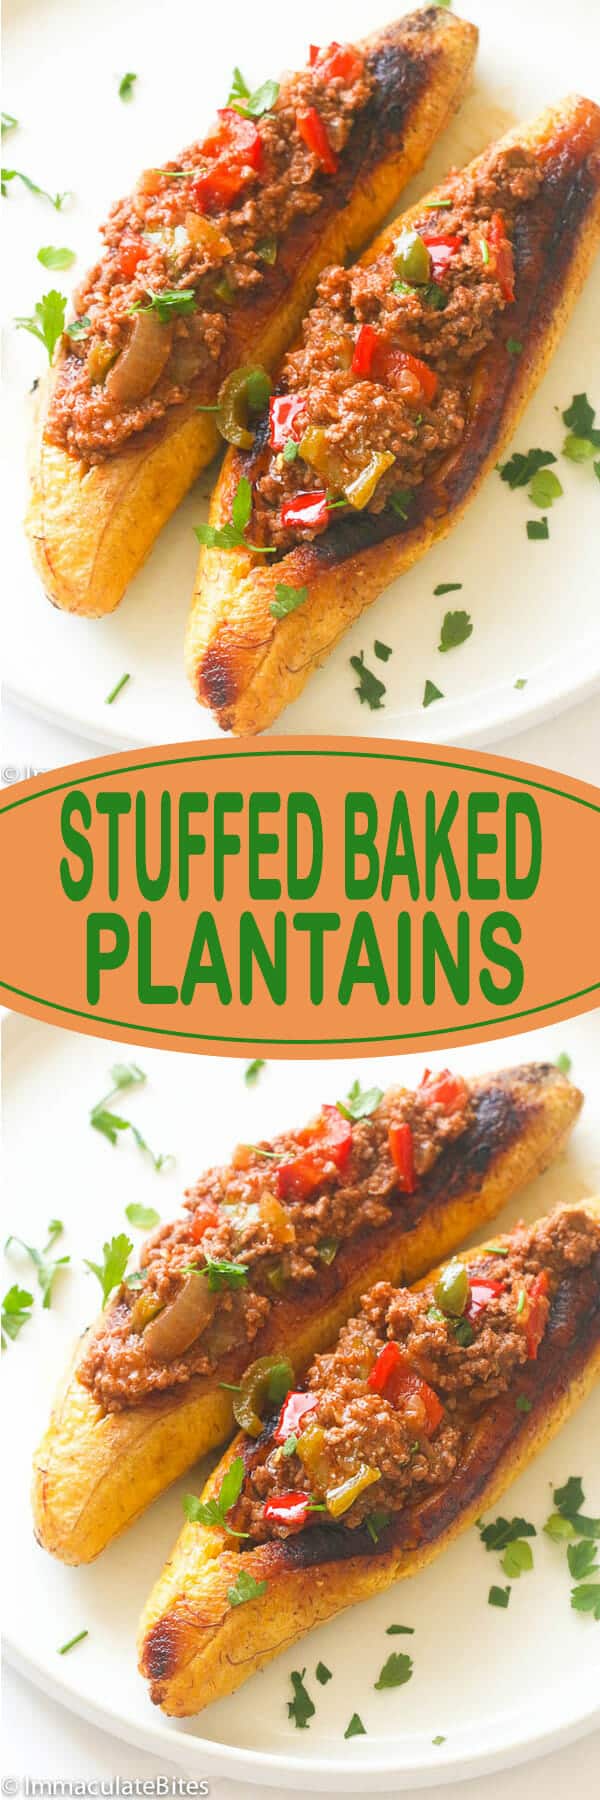 Roasted plantains filled with seasoned ground meat, tomatoes, onions, bell pepper, and spices, topped with cheese for lunch, dinner or even breakfast- very comforting!